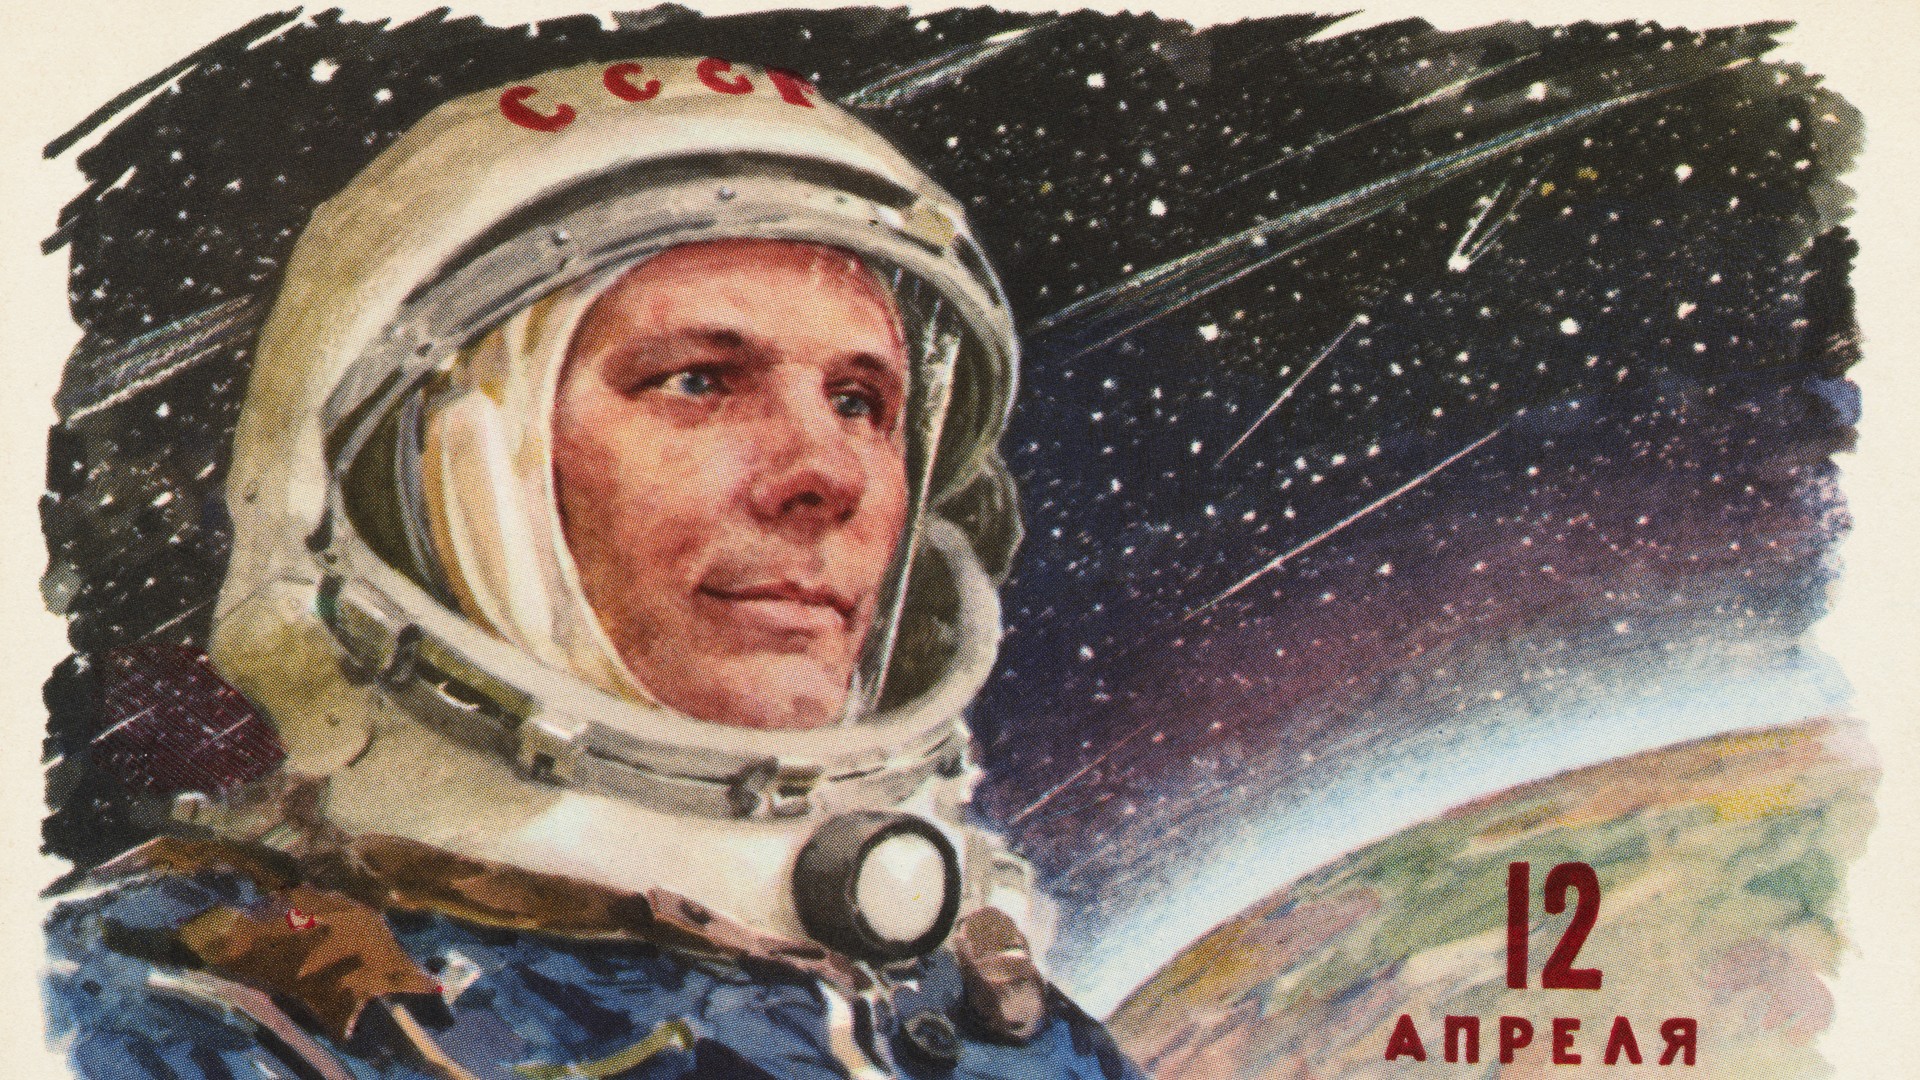 A postcard of Yuri Gagarin, the first man to enter outer space